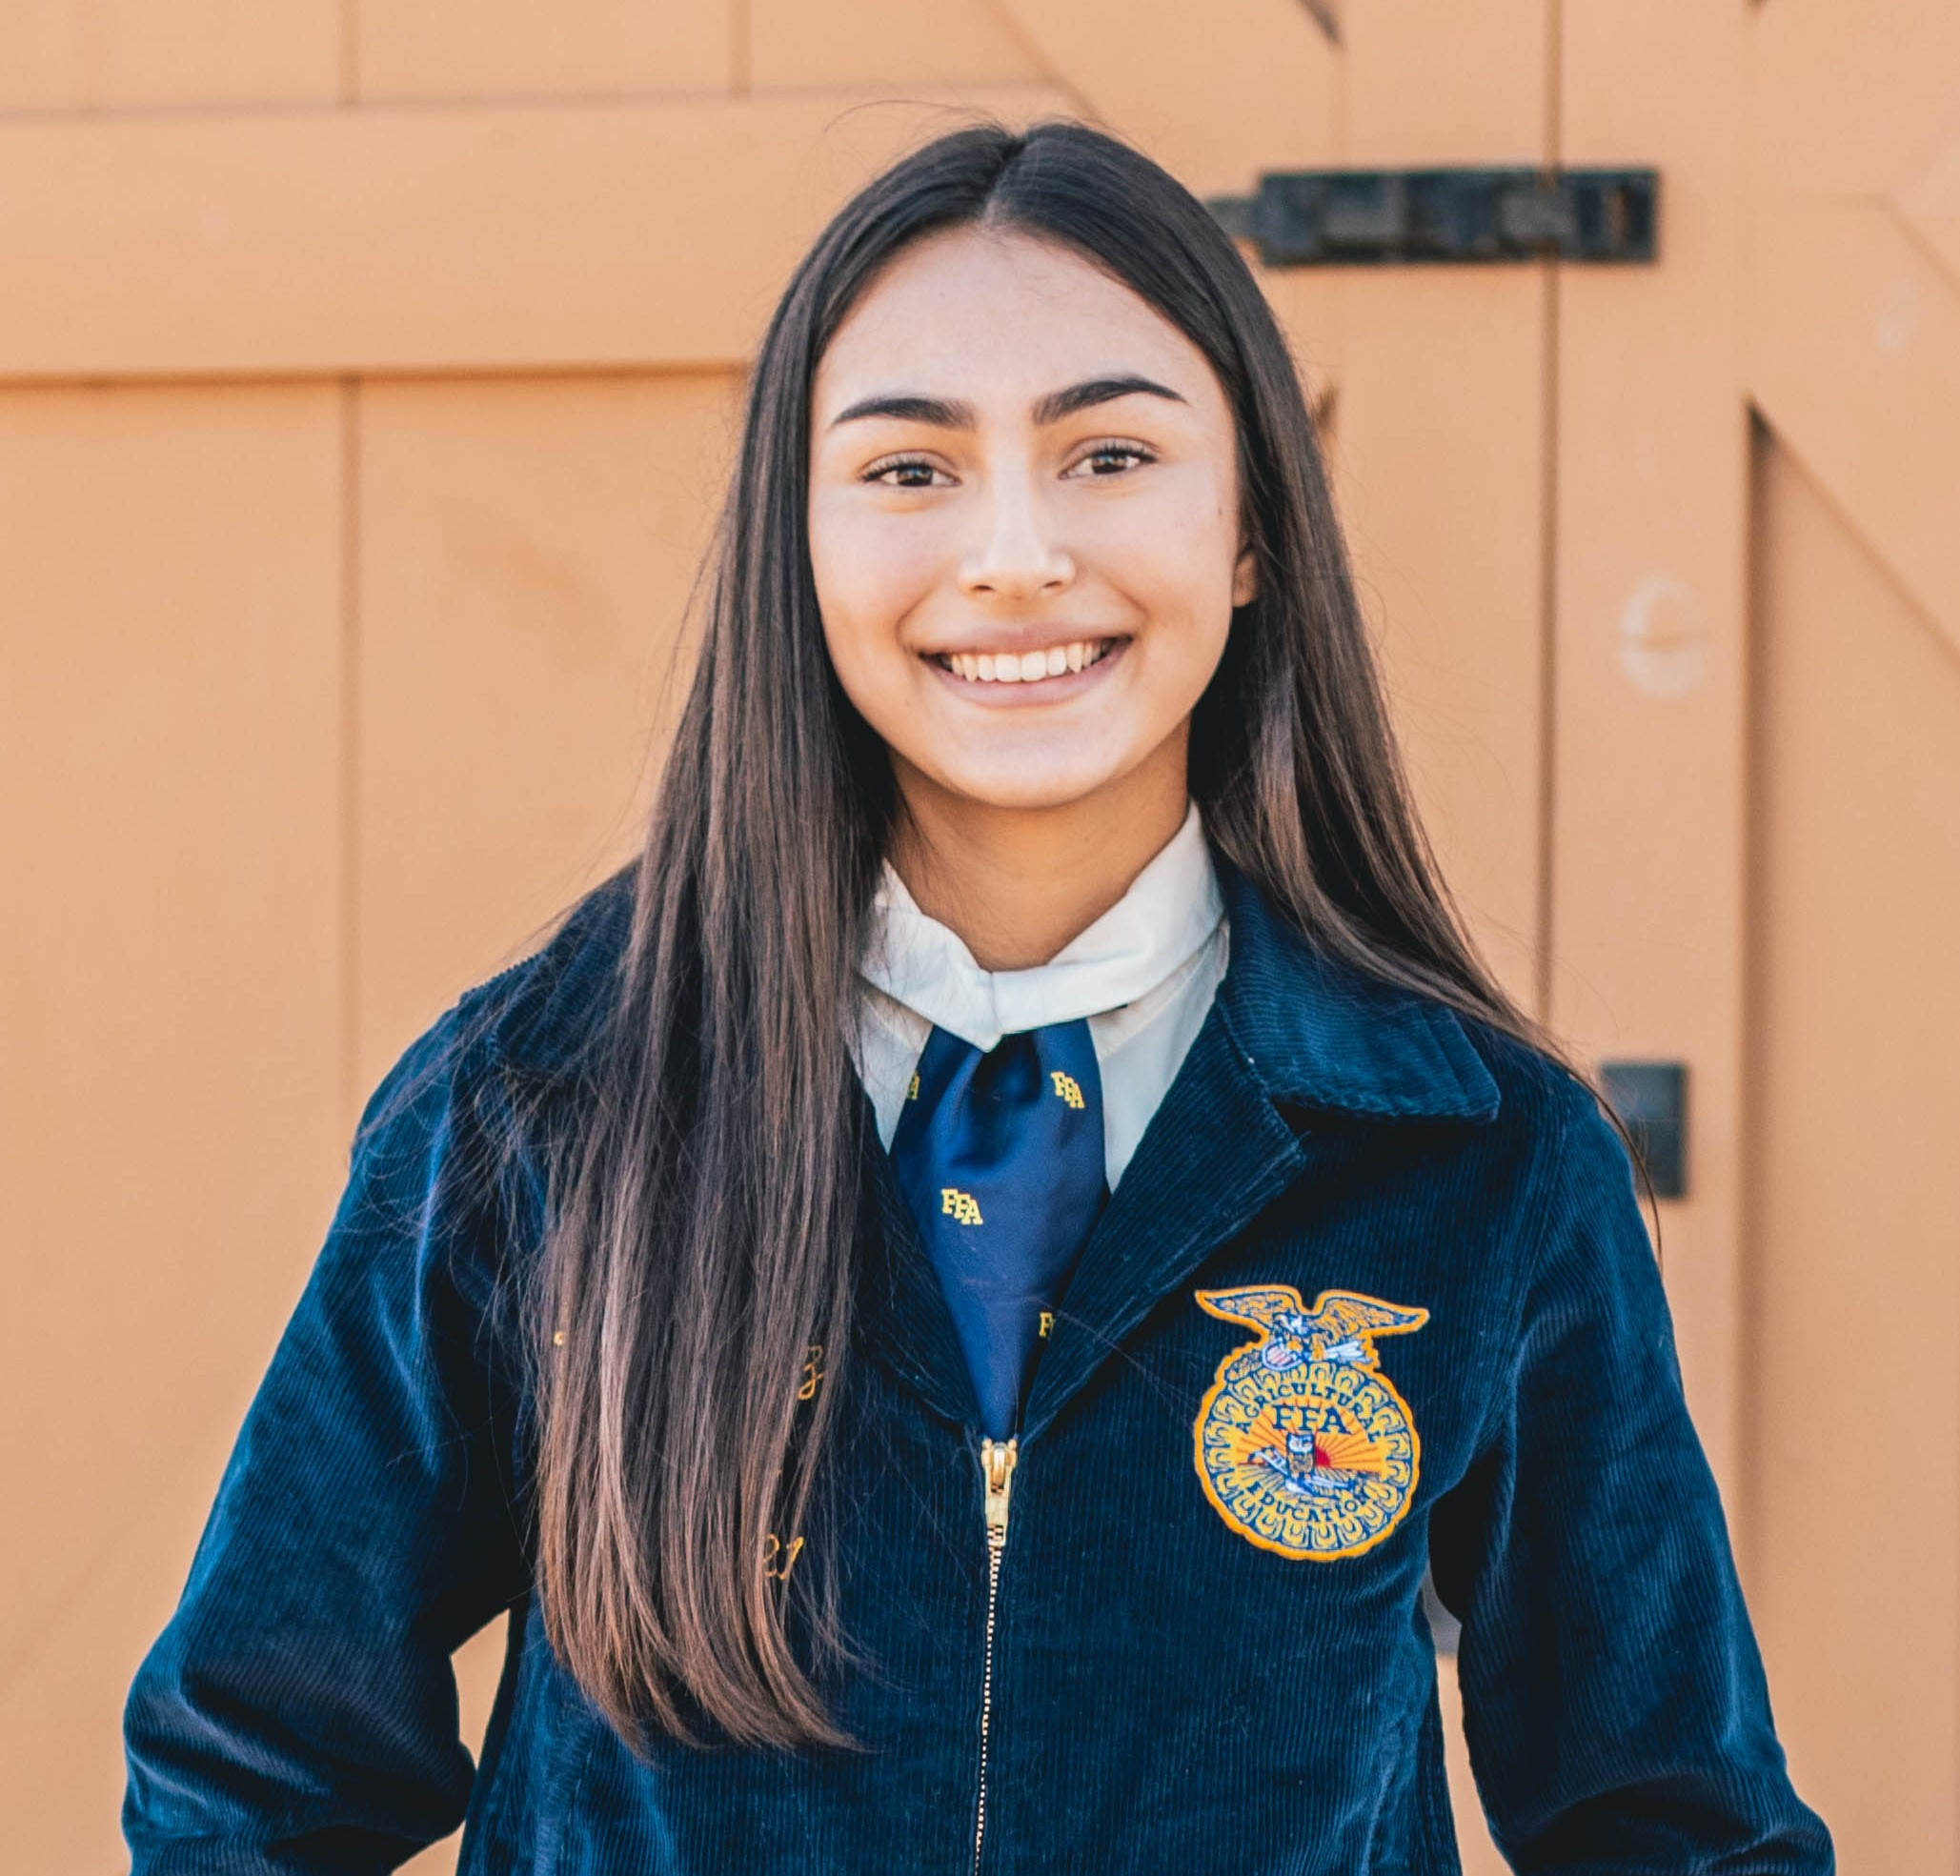 Lesly Madriz, a student at Madera South High School in Madera, was elected State Treasurer. 